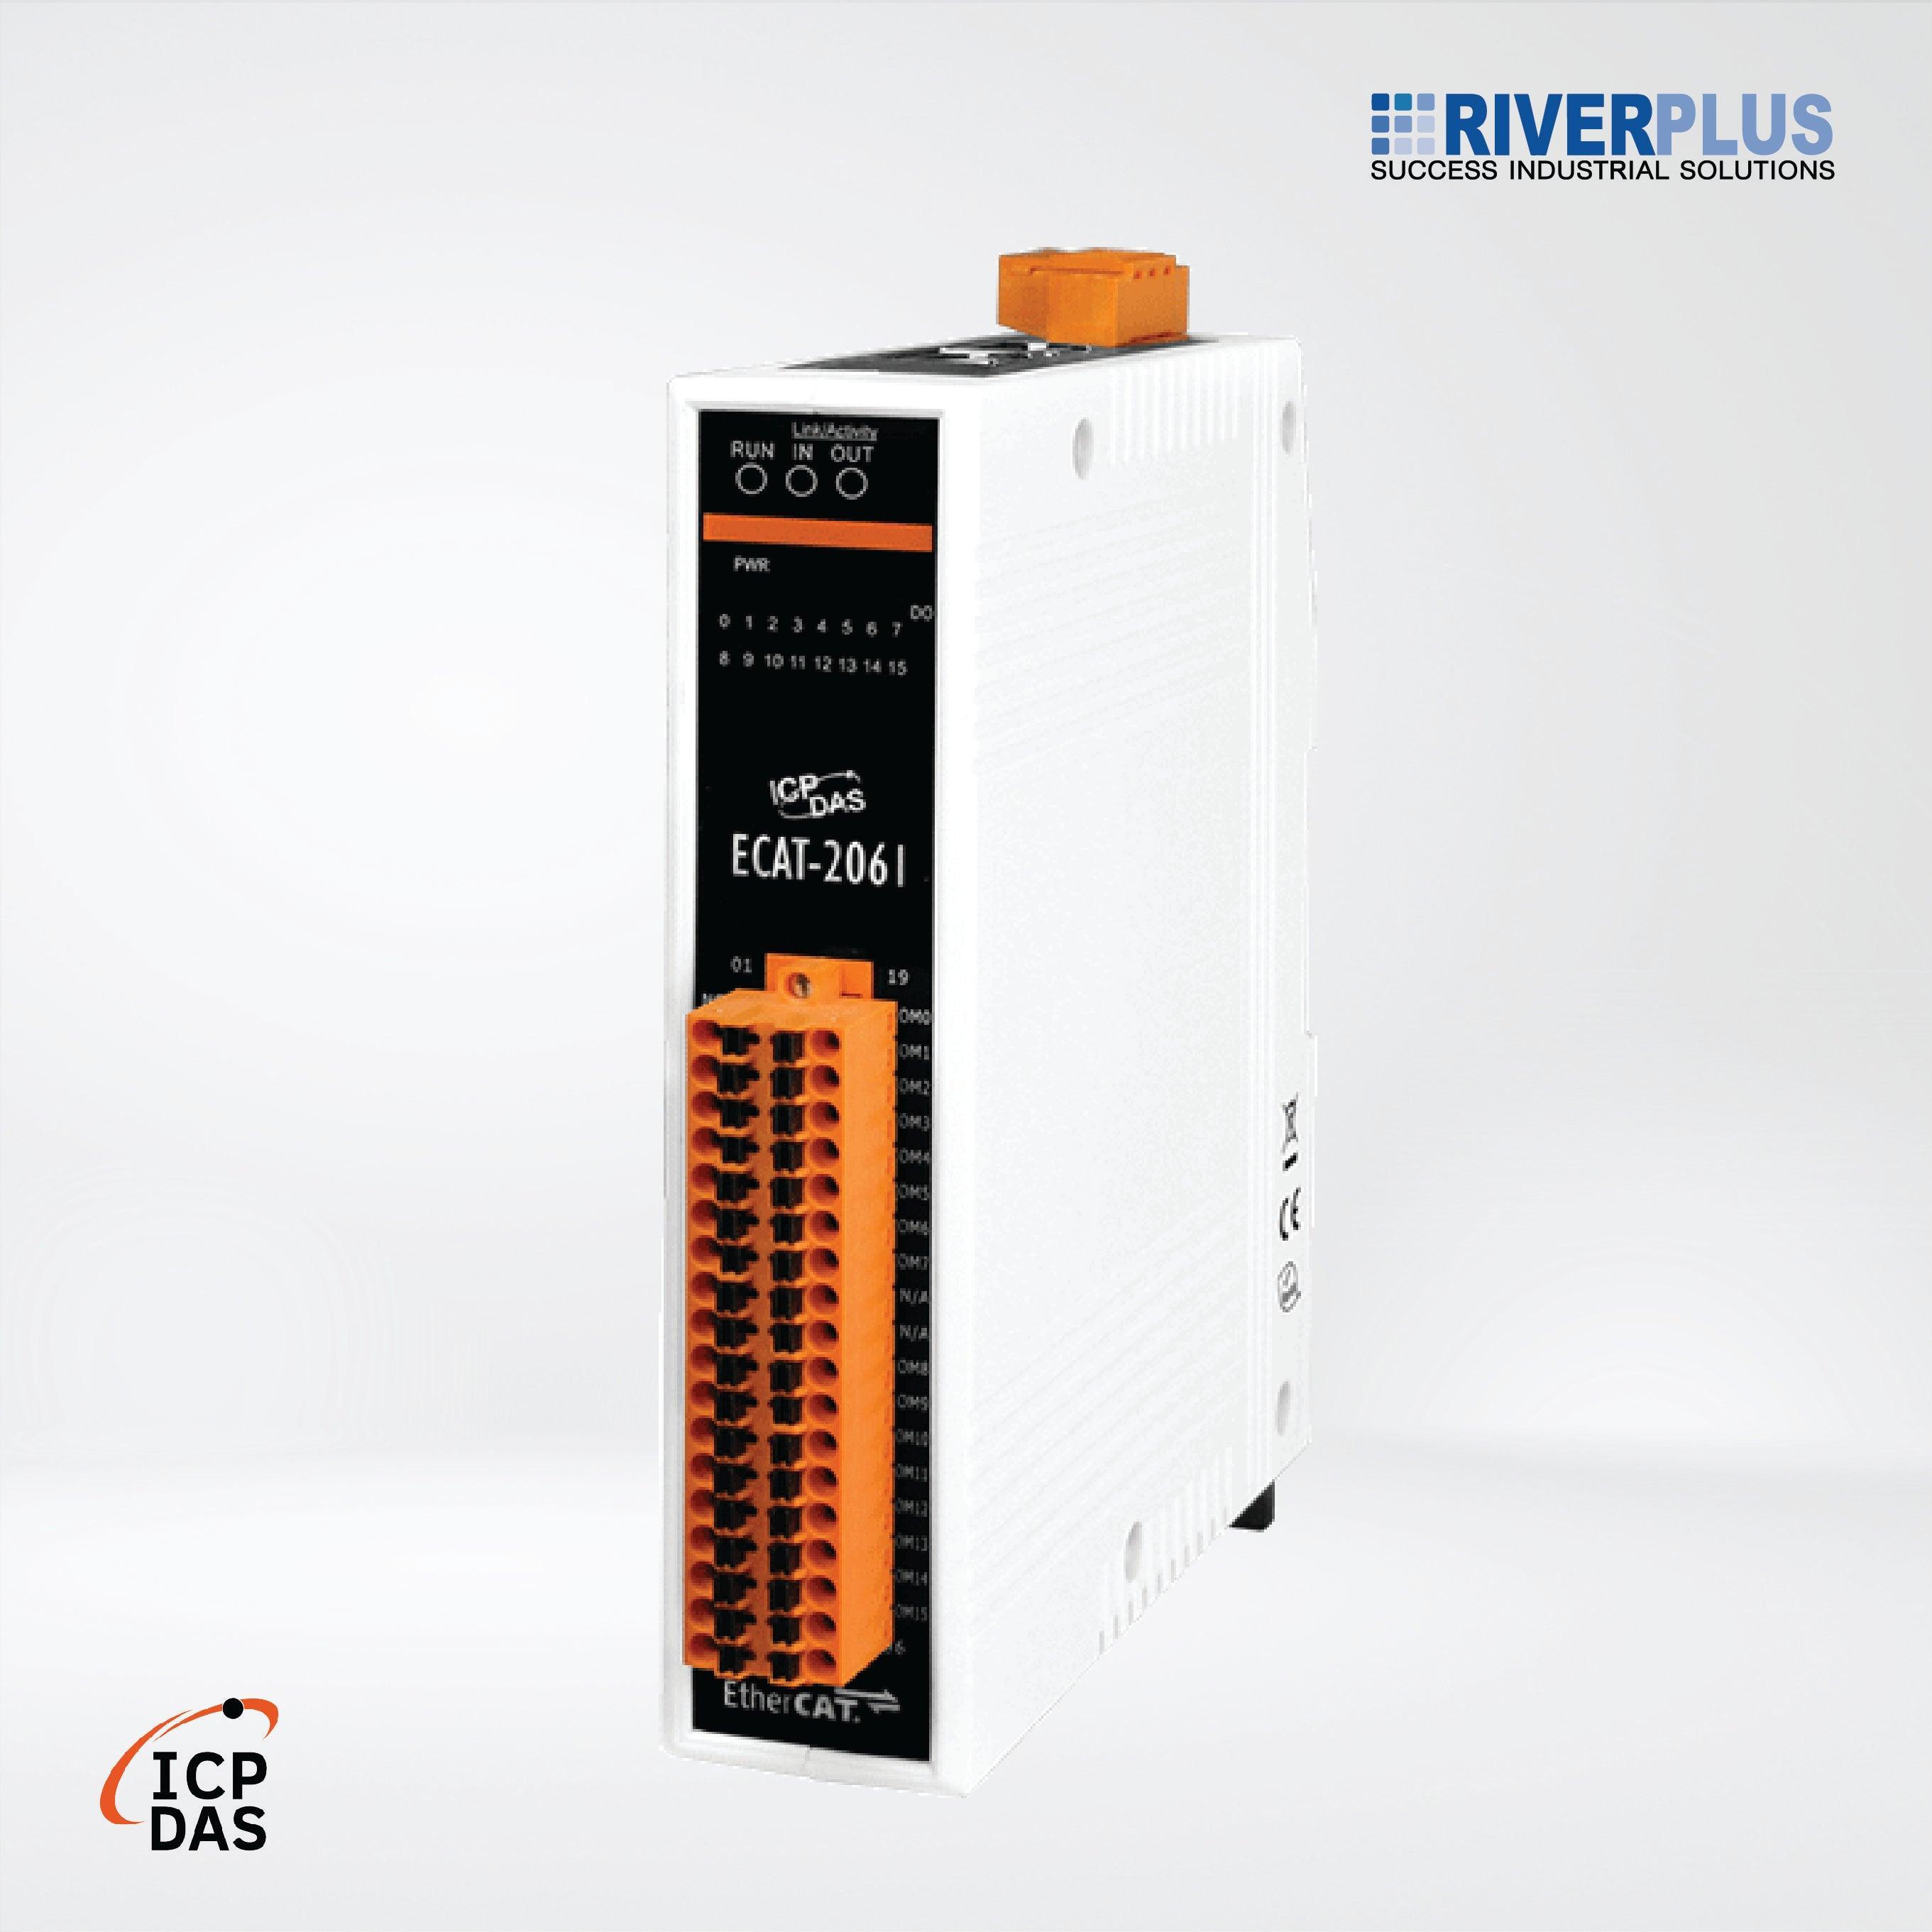 ECAT-2061 EtherCAT Slave I/O Module with Isolated 16-ch Relay - Riverplus